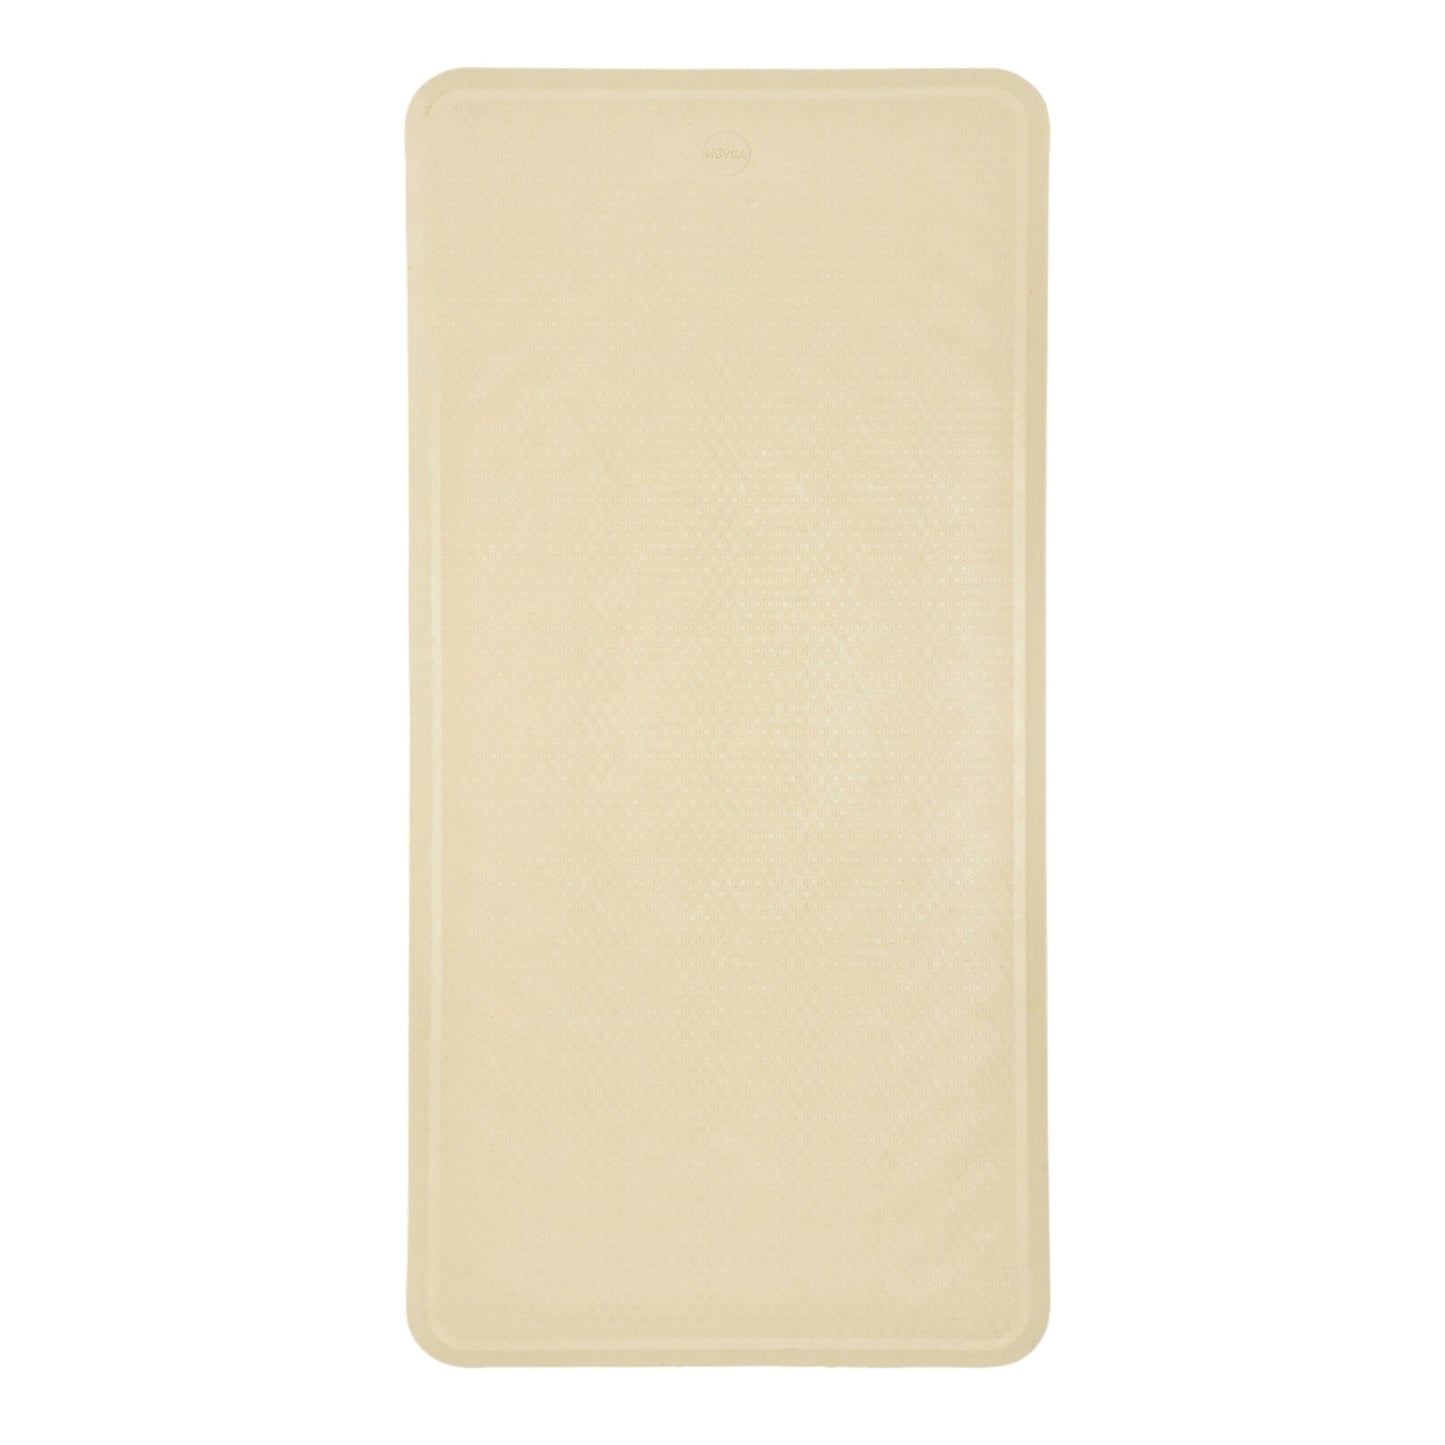 Hevea Upcycled Large Natural Rubber Bath Mat - Sand